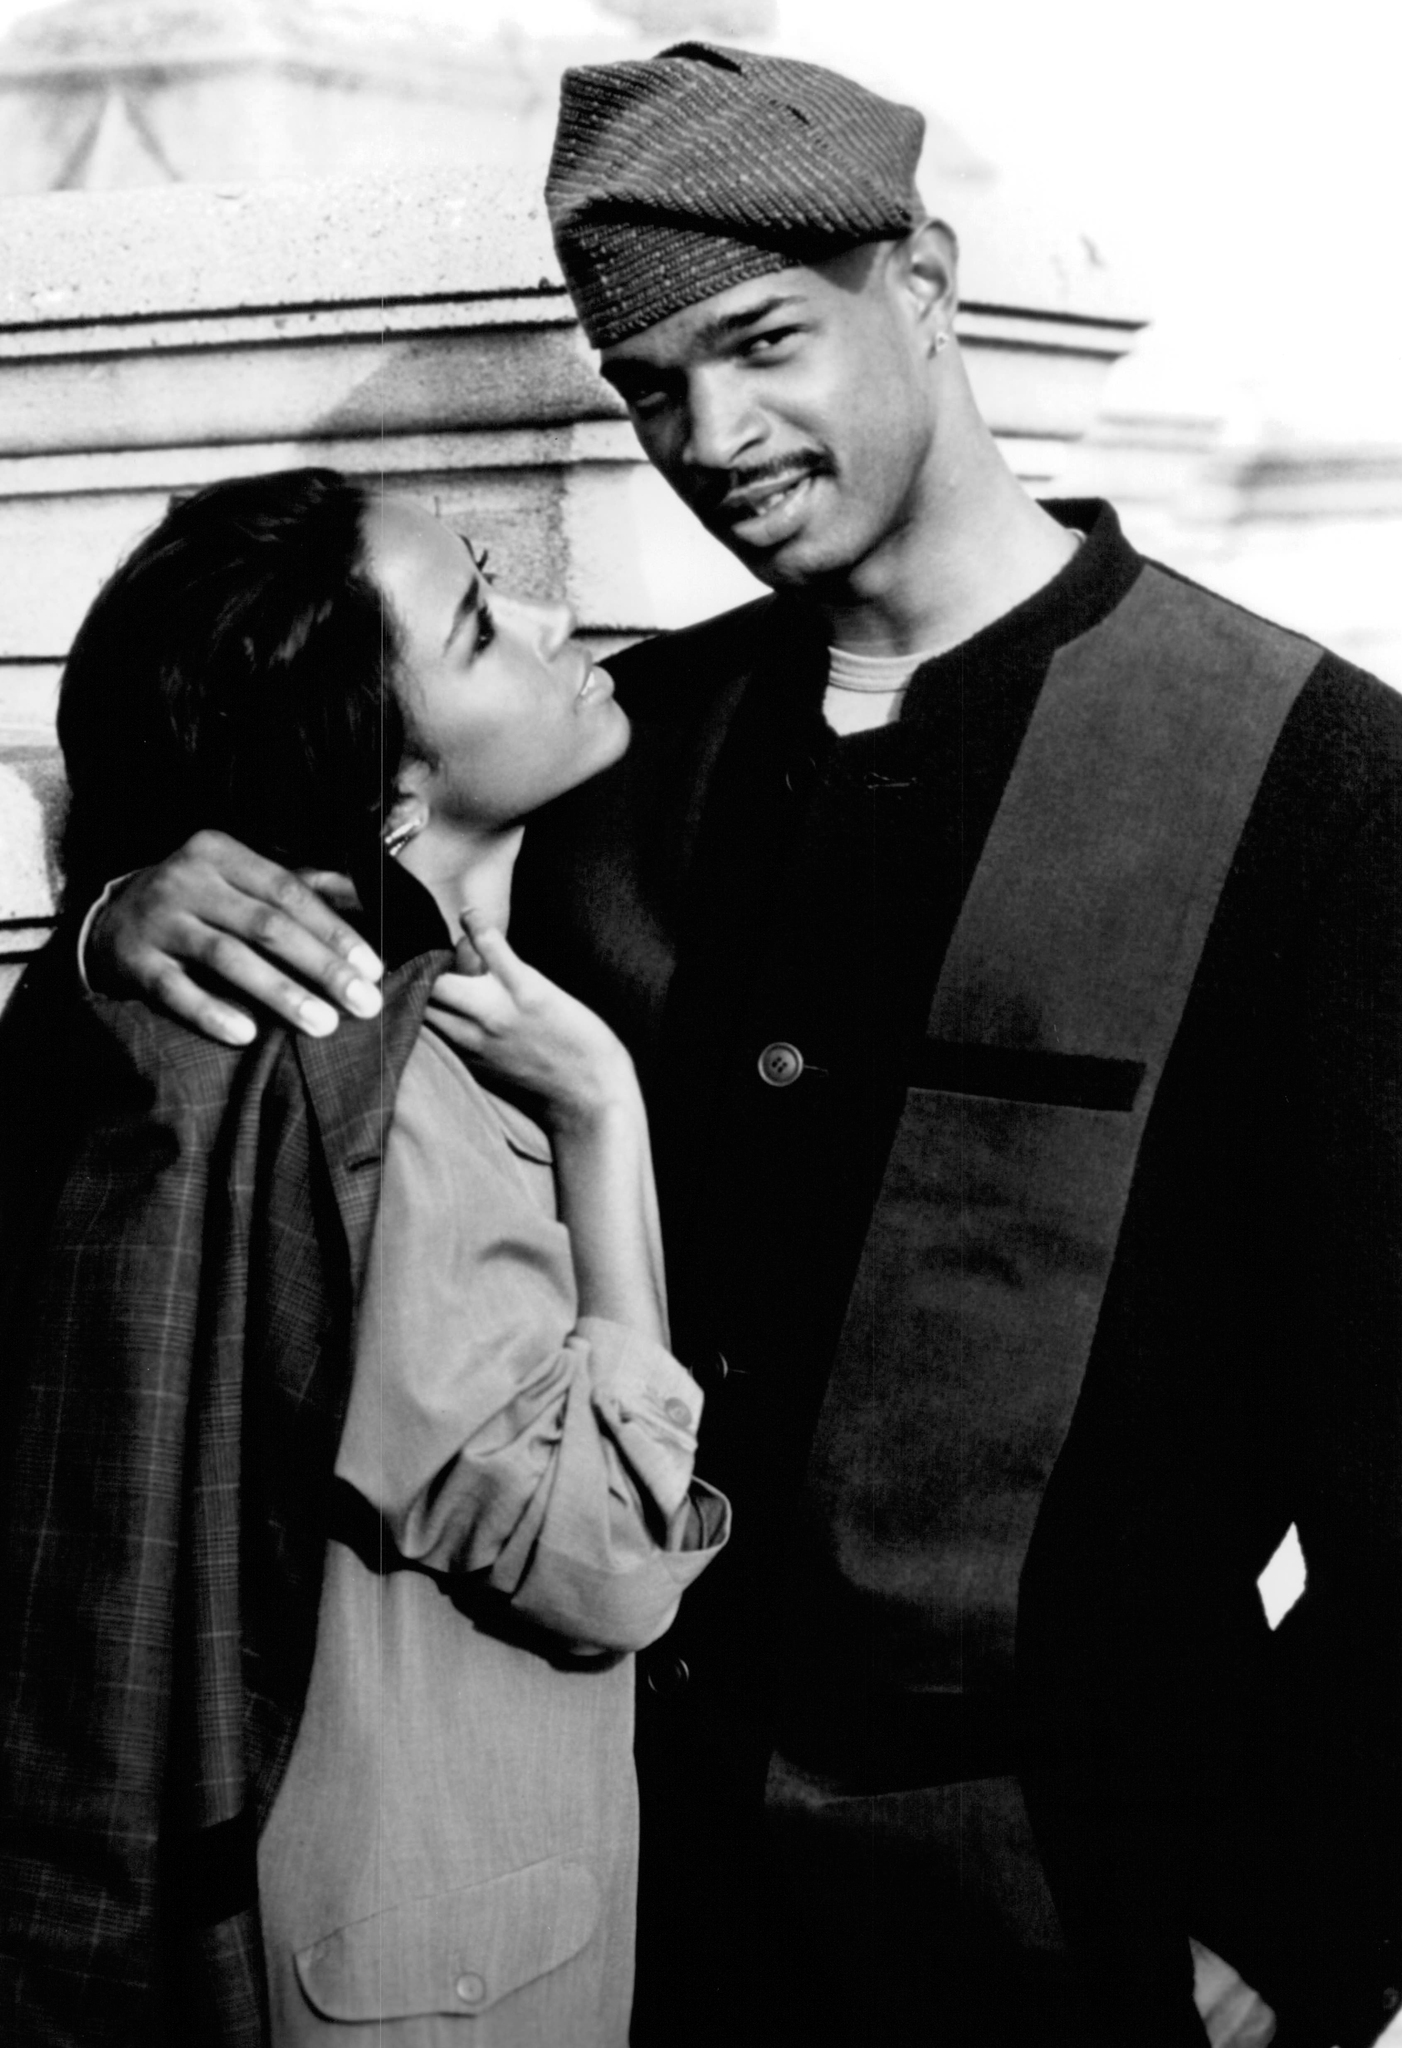 Still of Stacey Dash and Damon Wayans in Mo' Money (1992)